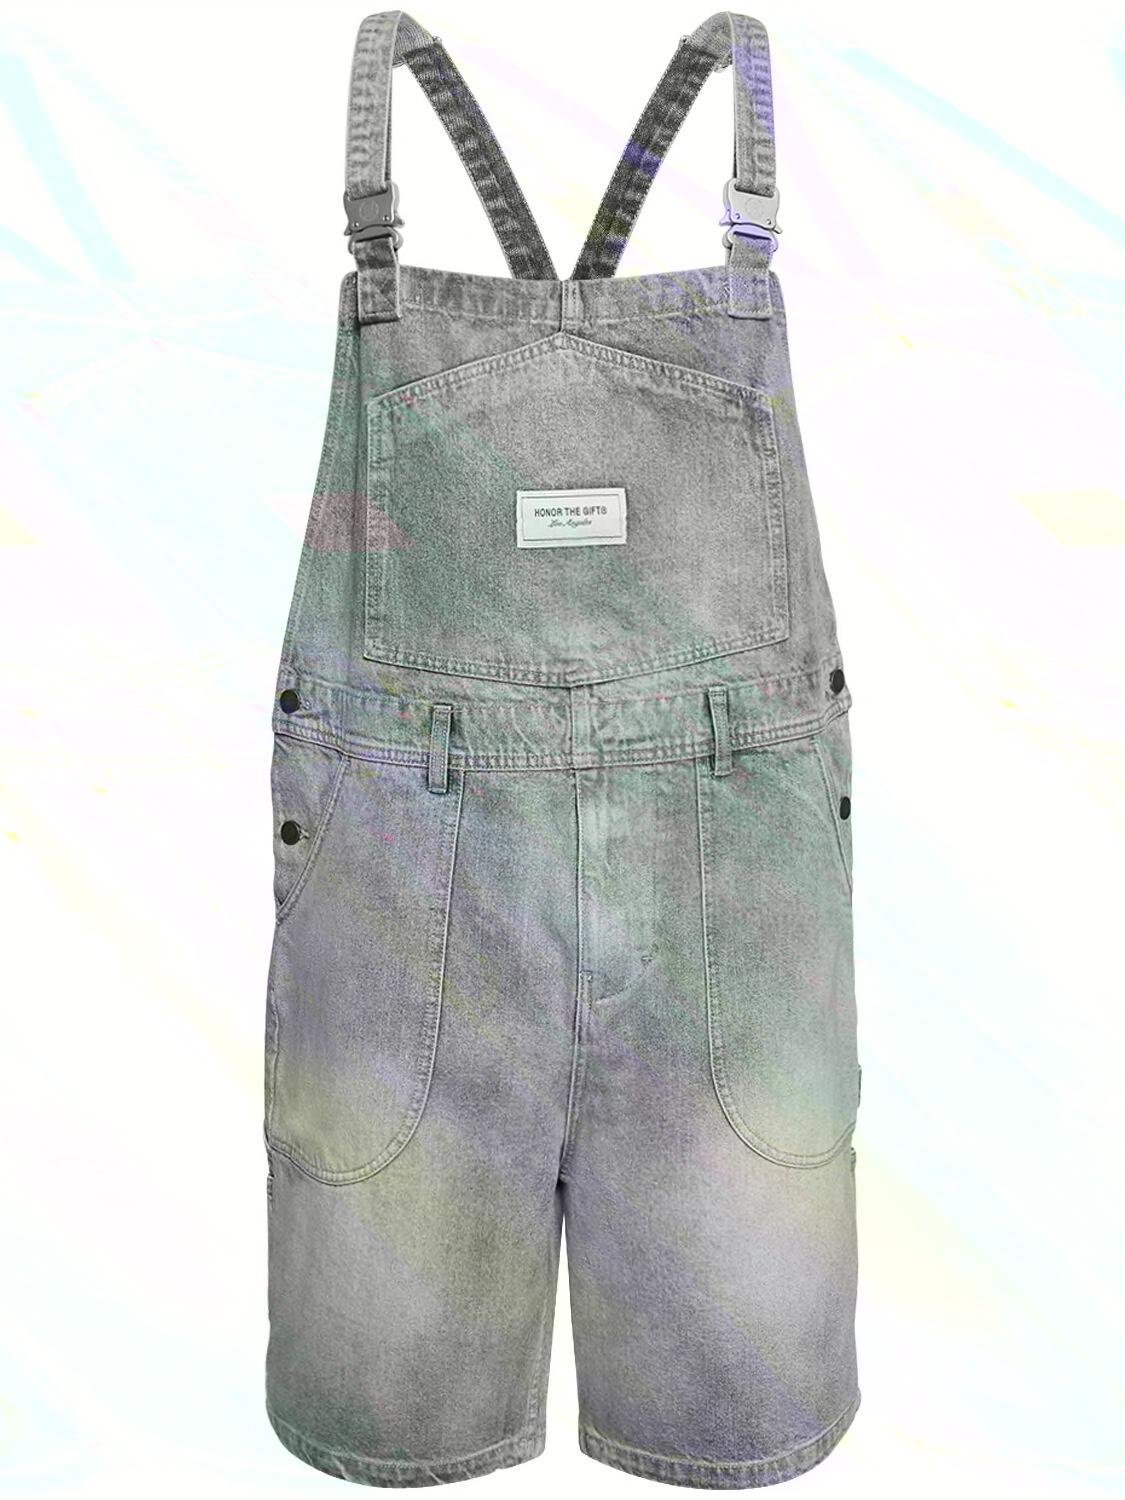 B-summer Short Overalls by HONOR THE GIFT